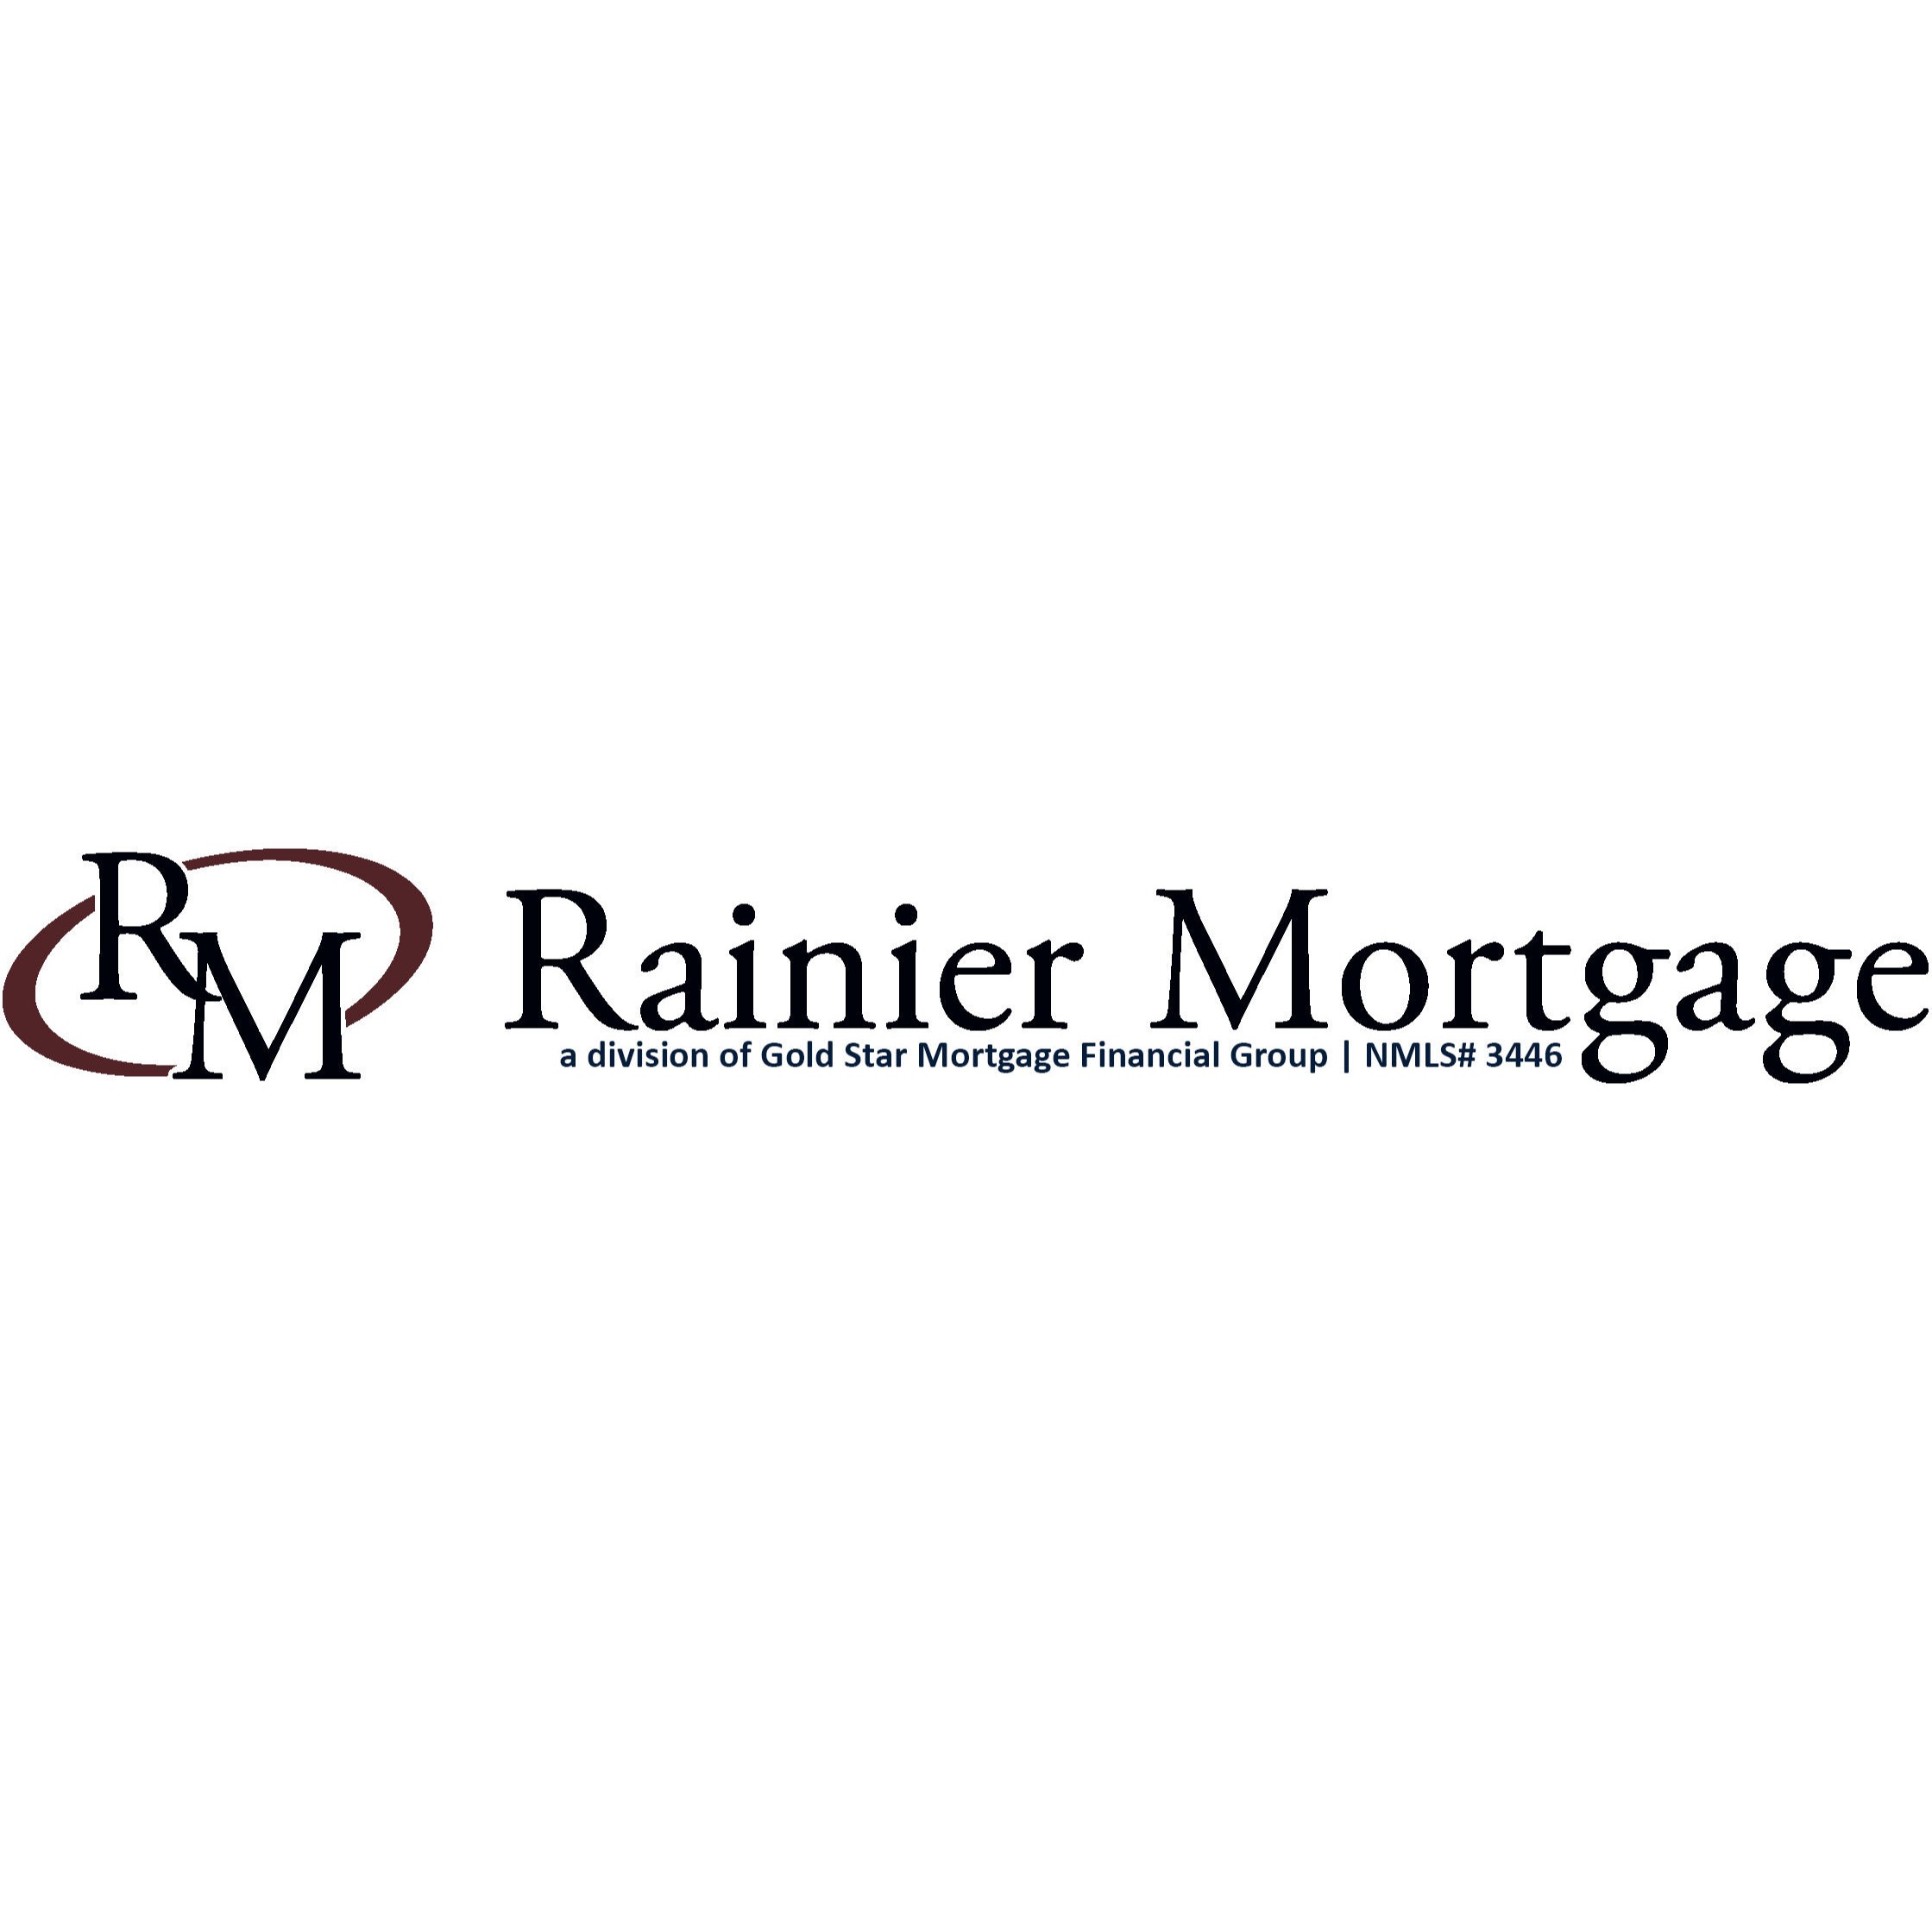 Rainier Mortgage, a division of Gold Star Mortgage Financial Group